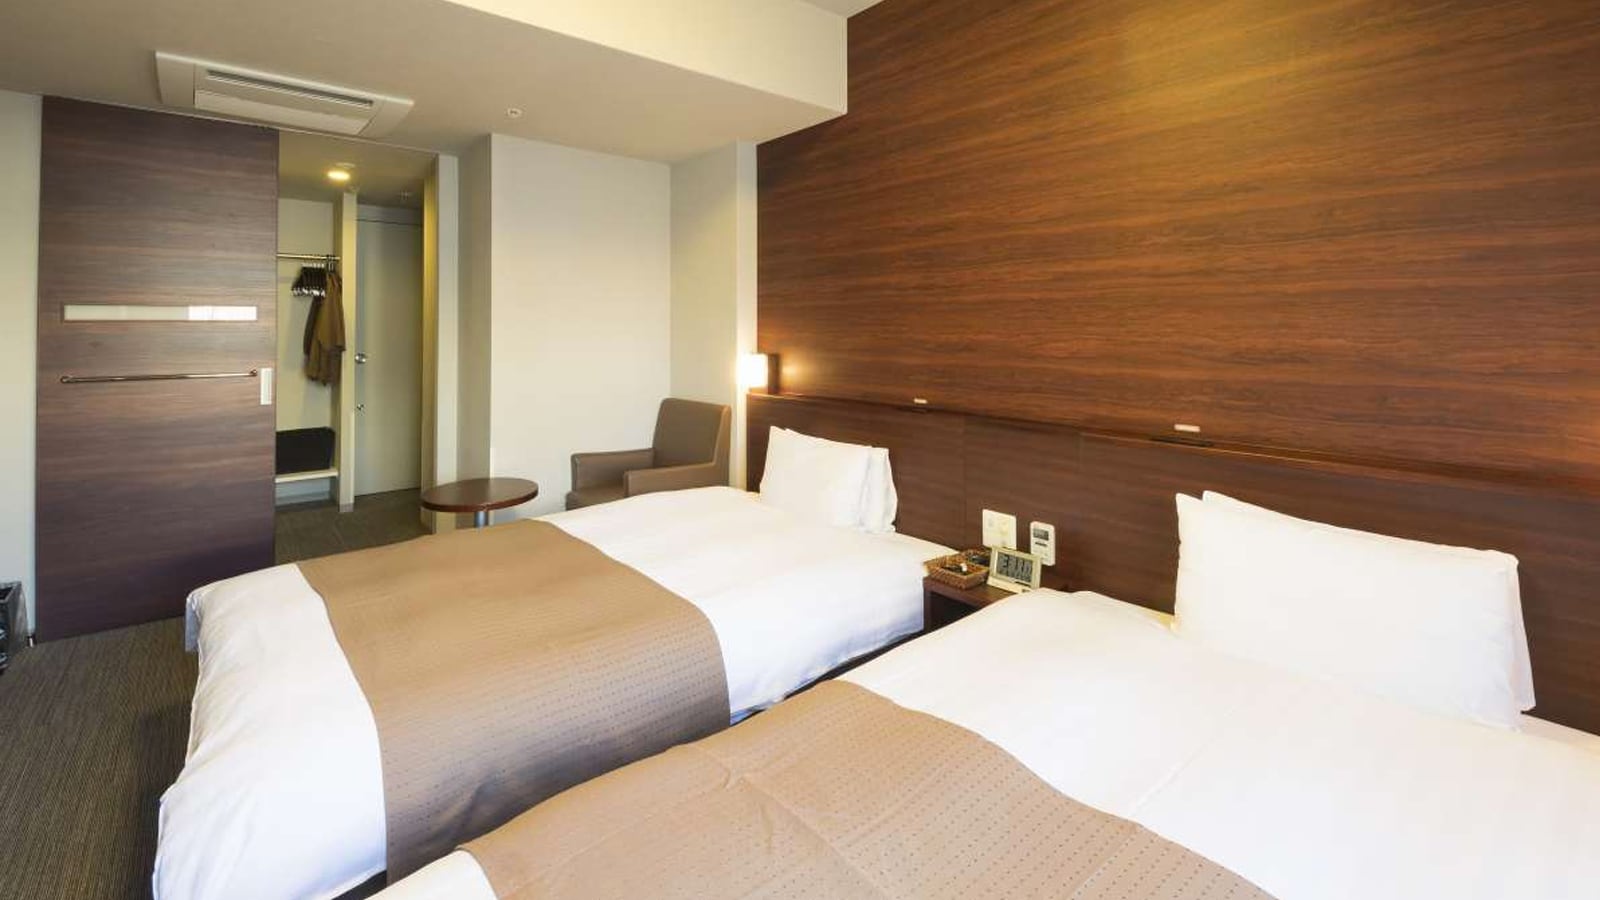 ■ Non-smoking connecting room 36.57 sqm Bed width 120 cm & times; 195 cm & times; 3 units